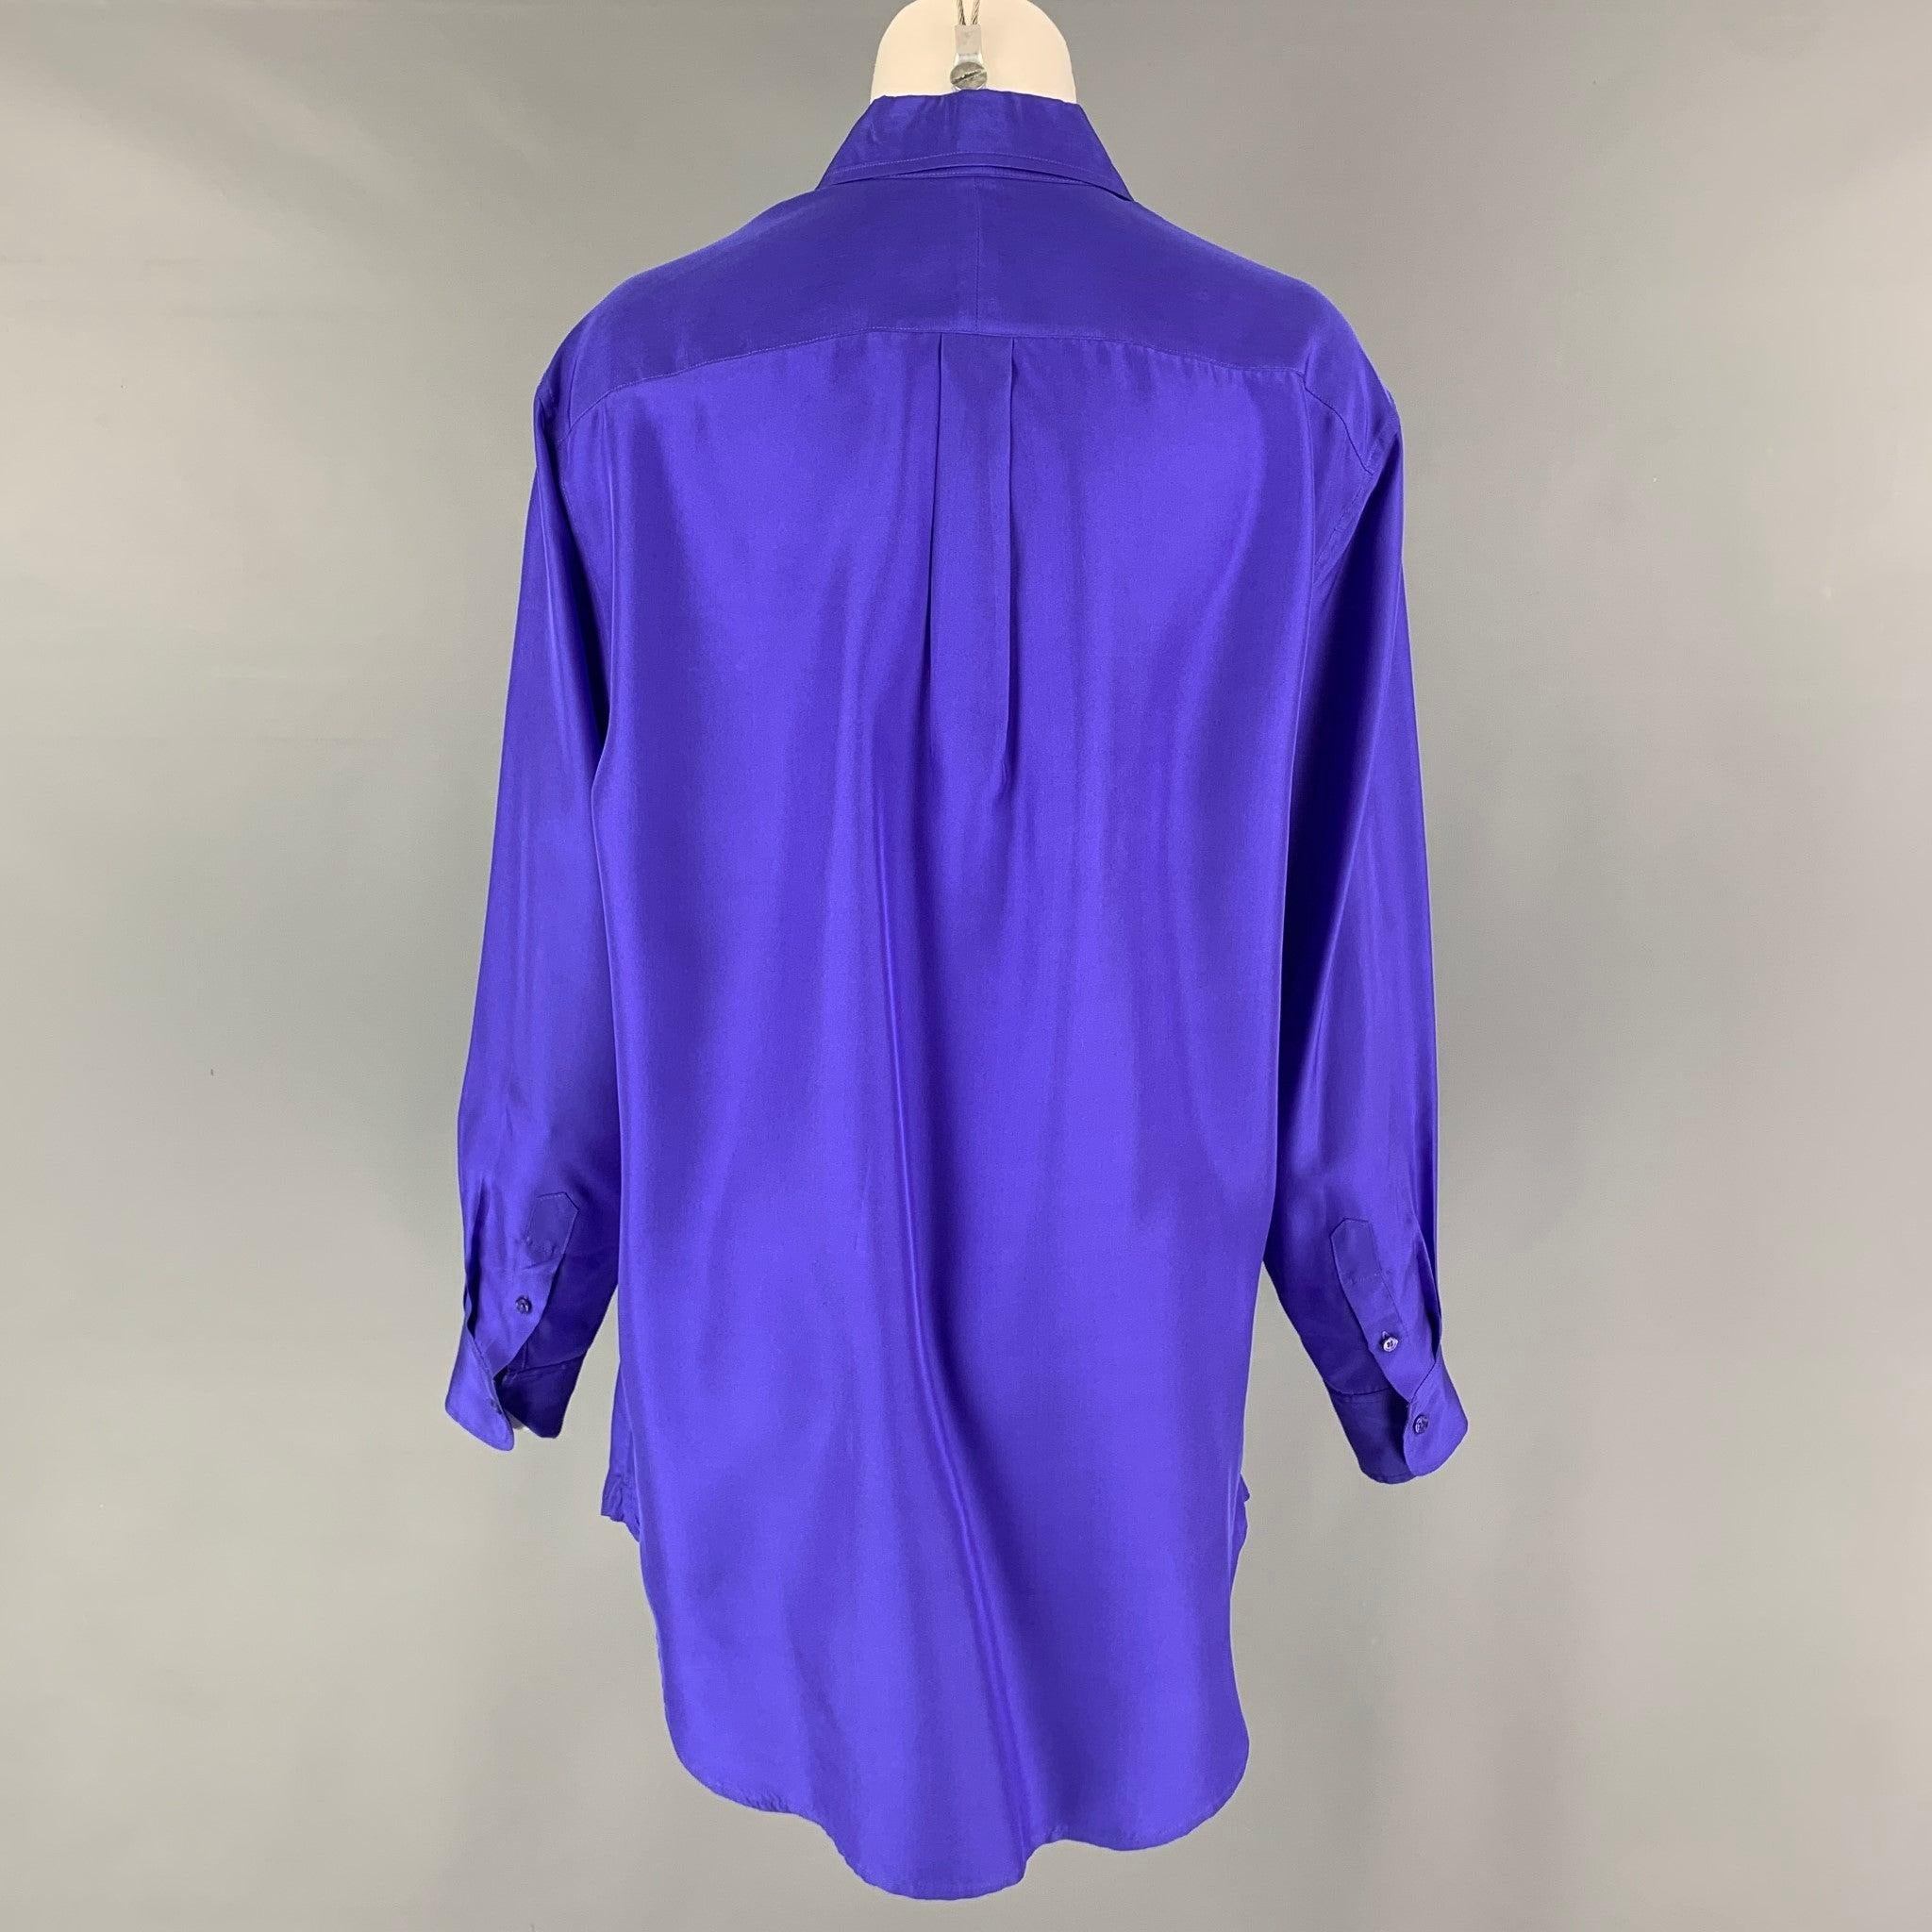 RALPH LAUREN Black Label Size 8 Purple Silk Button Up Shirt In Good Condition For Sale In San Francisco, CA